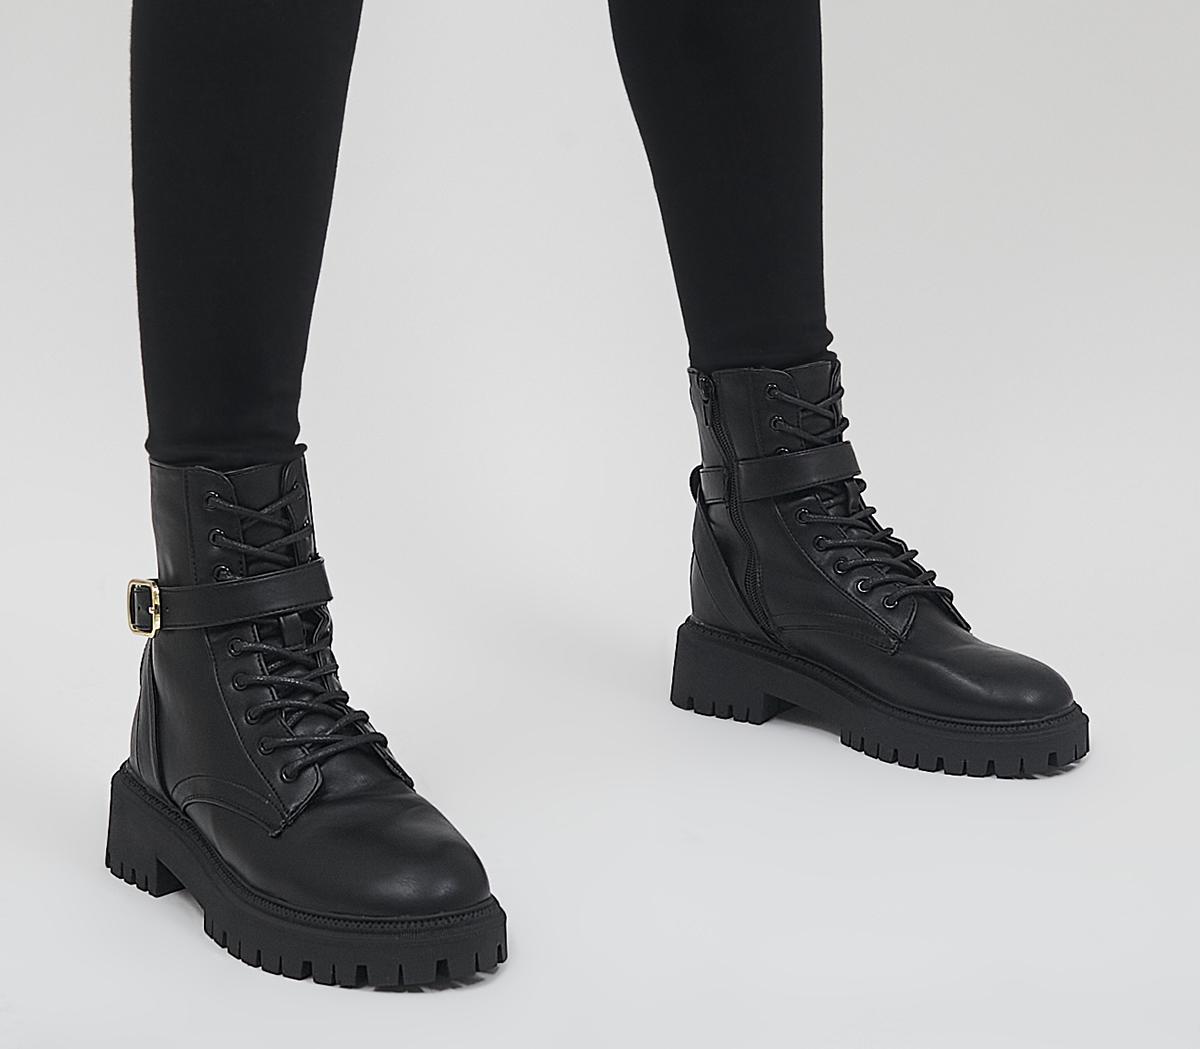 OFFICE Admire Chunky Lace Up Ankle Boots Black - Women's Chunky Boots